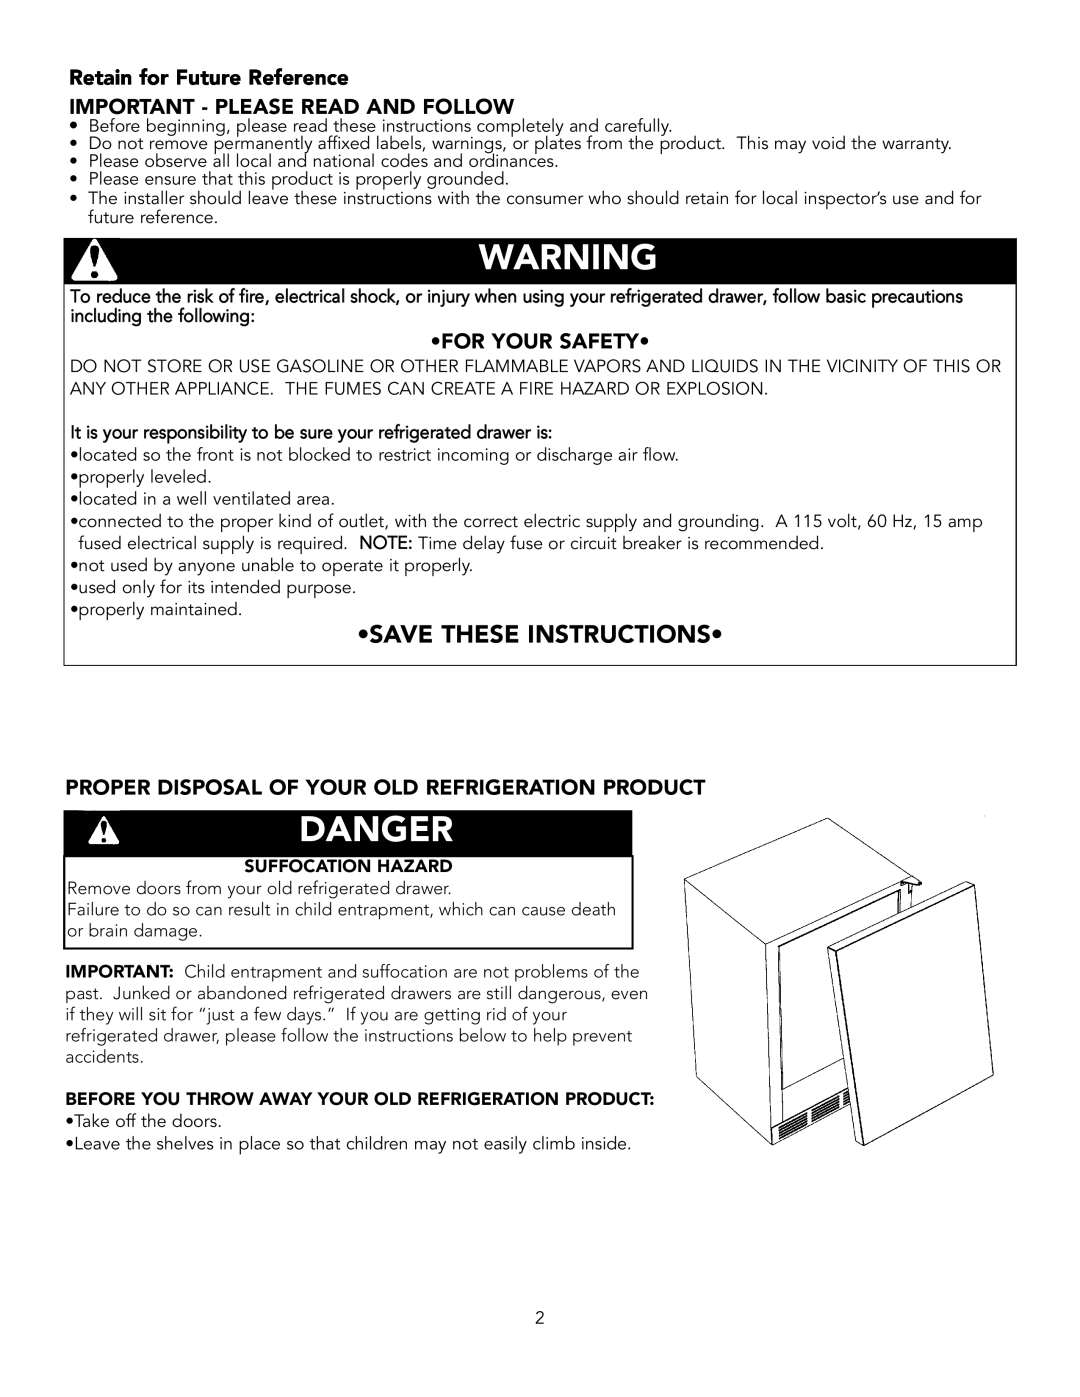 Viking Refrigerator Drawer manual Retain for Future Reference IMPORTANT - PLEASE READ AND FOLLOW, For Your Safety, Danger 